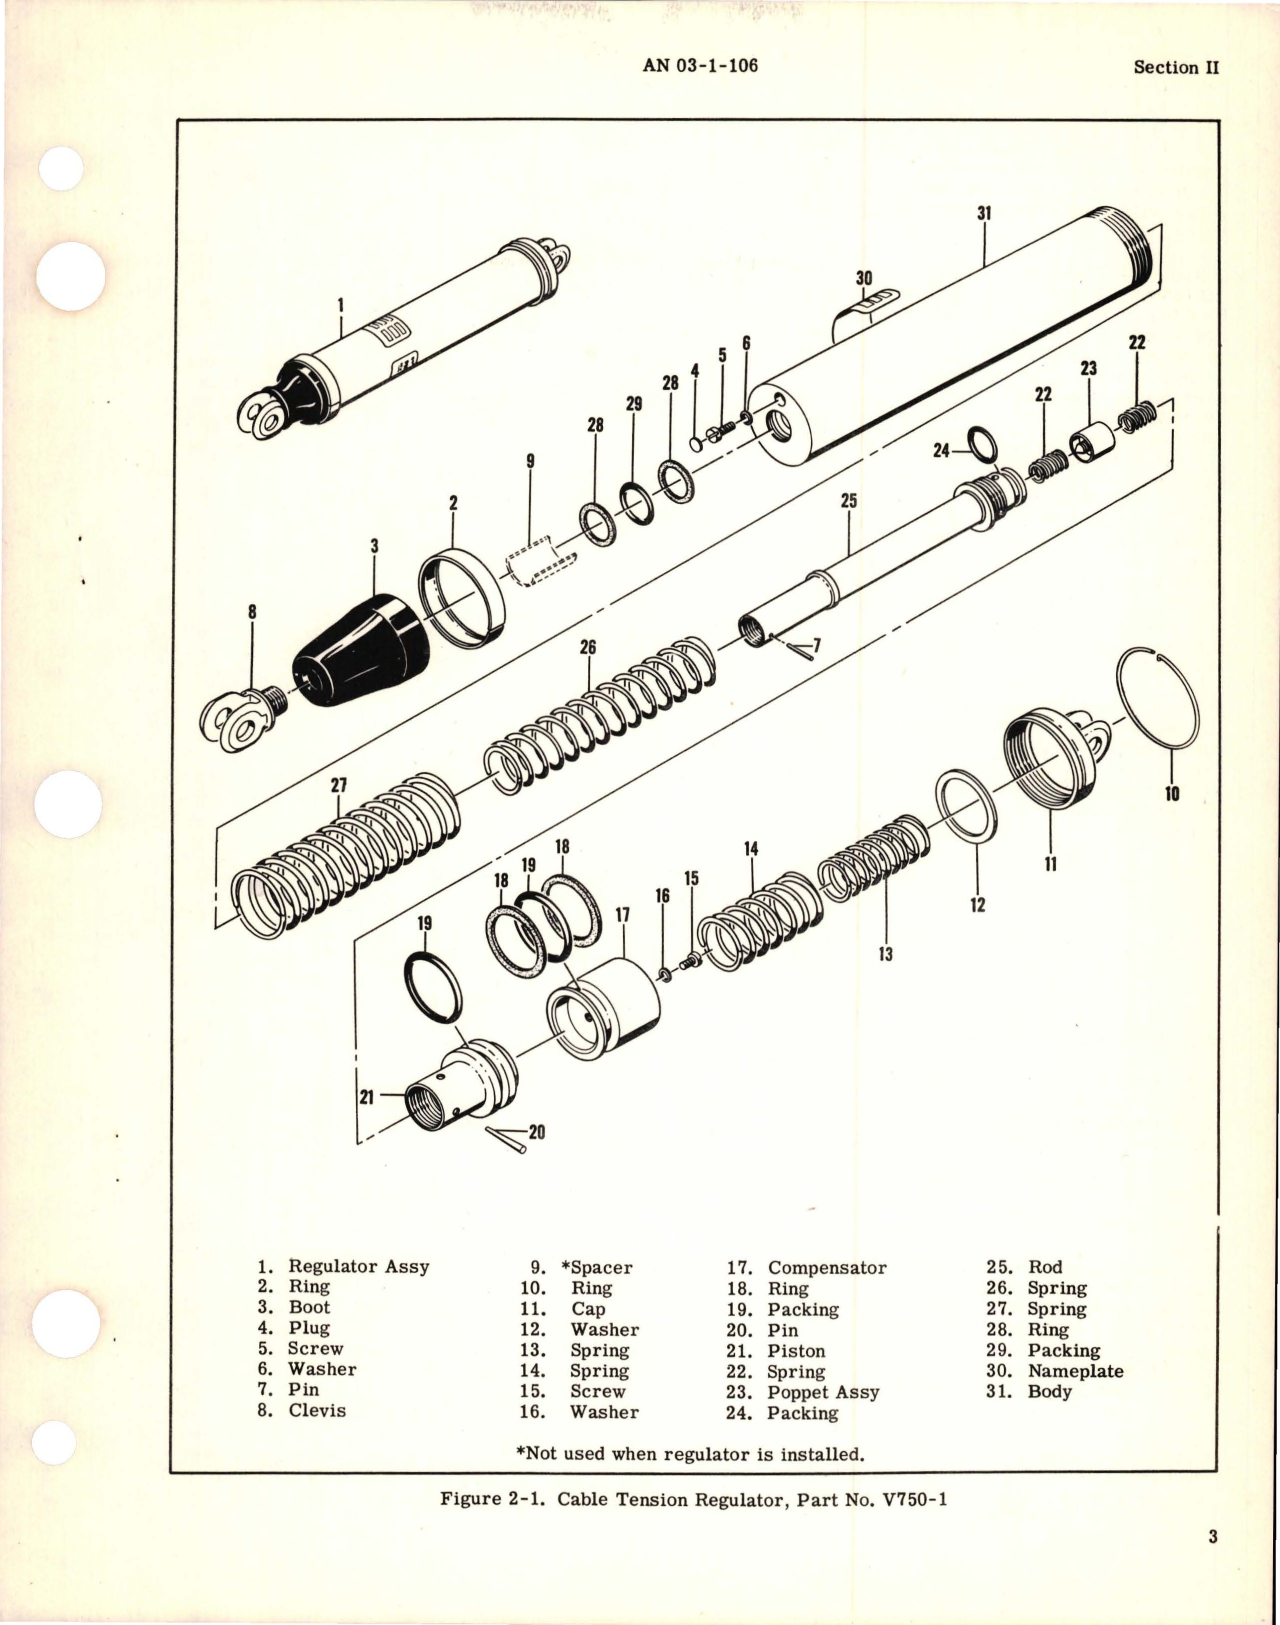 Sample page 5 from AirCorps Library document: Overhaul Instructions for Cable Tension Regulators - V720-3, V720-8-1, and V750-1